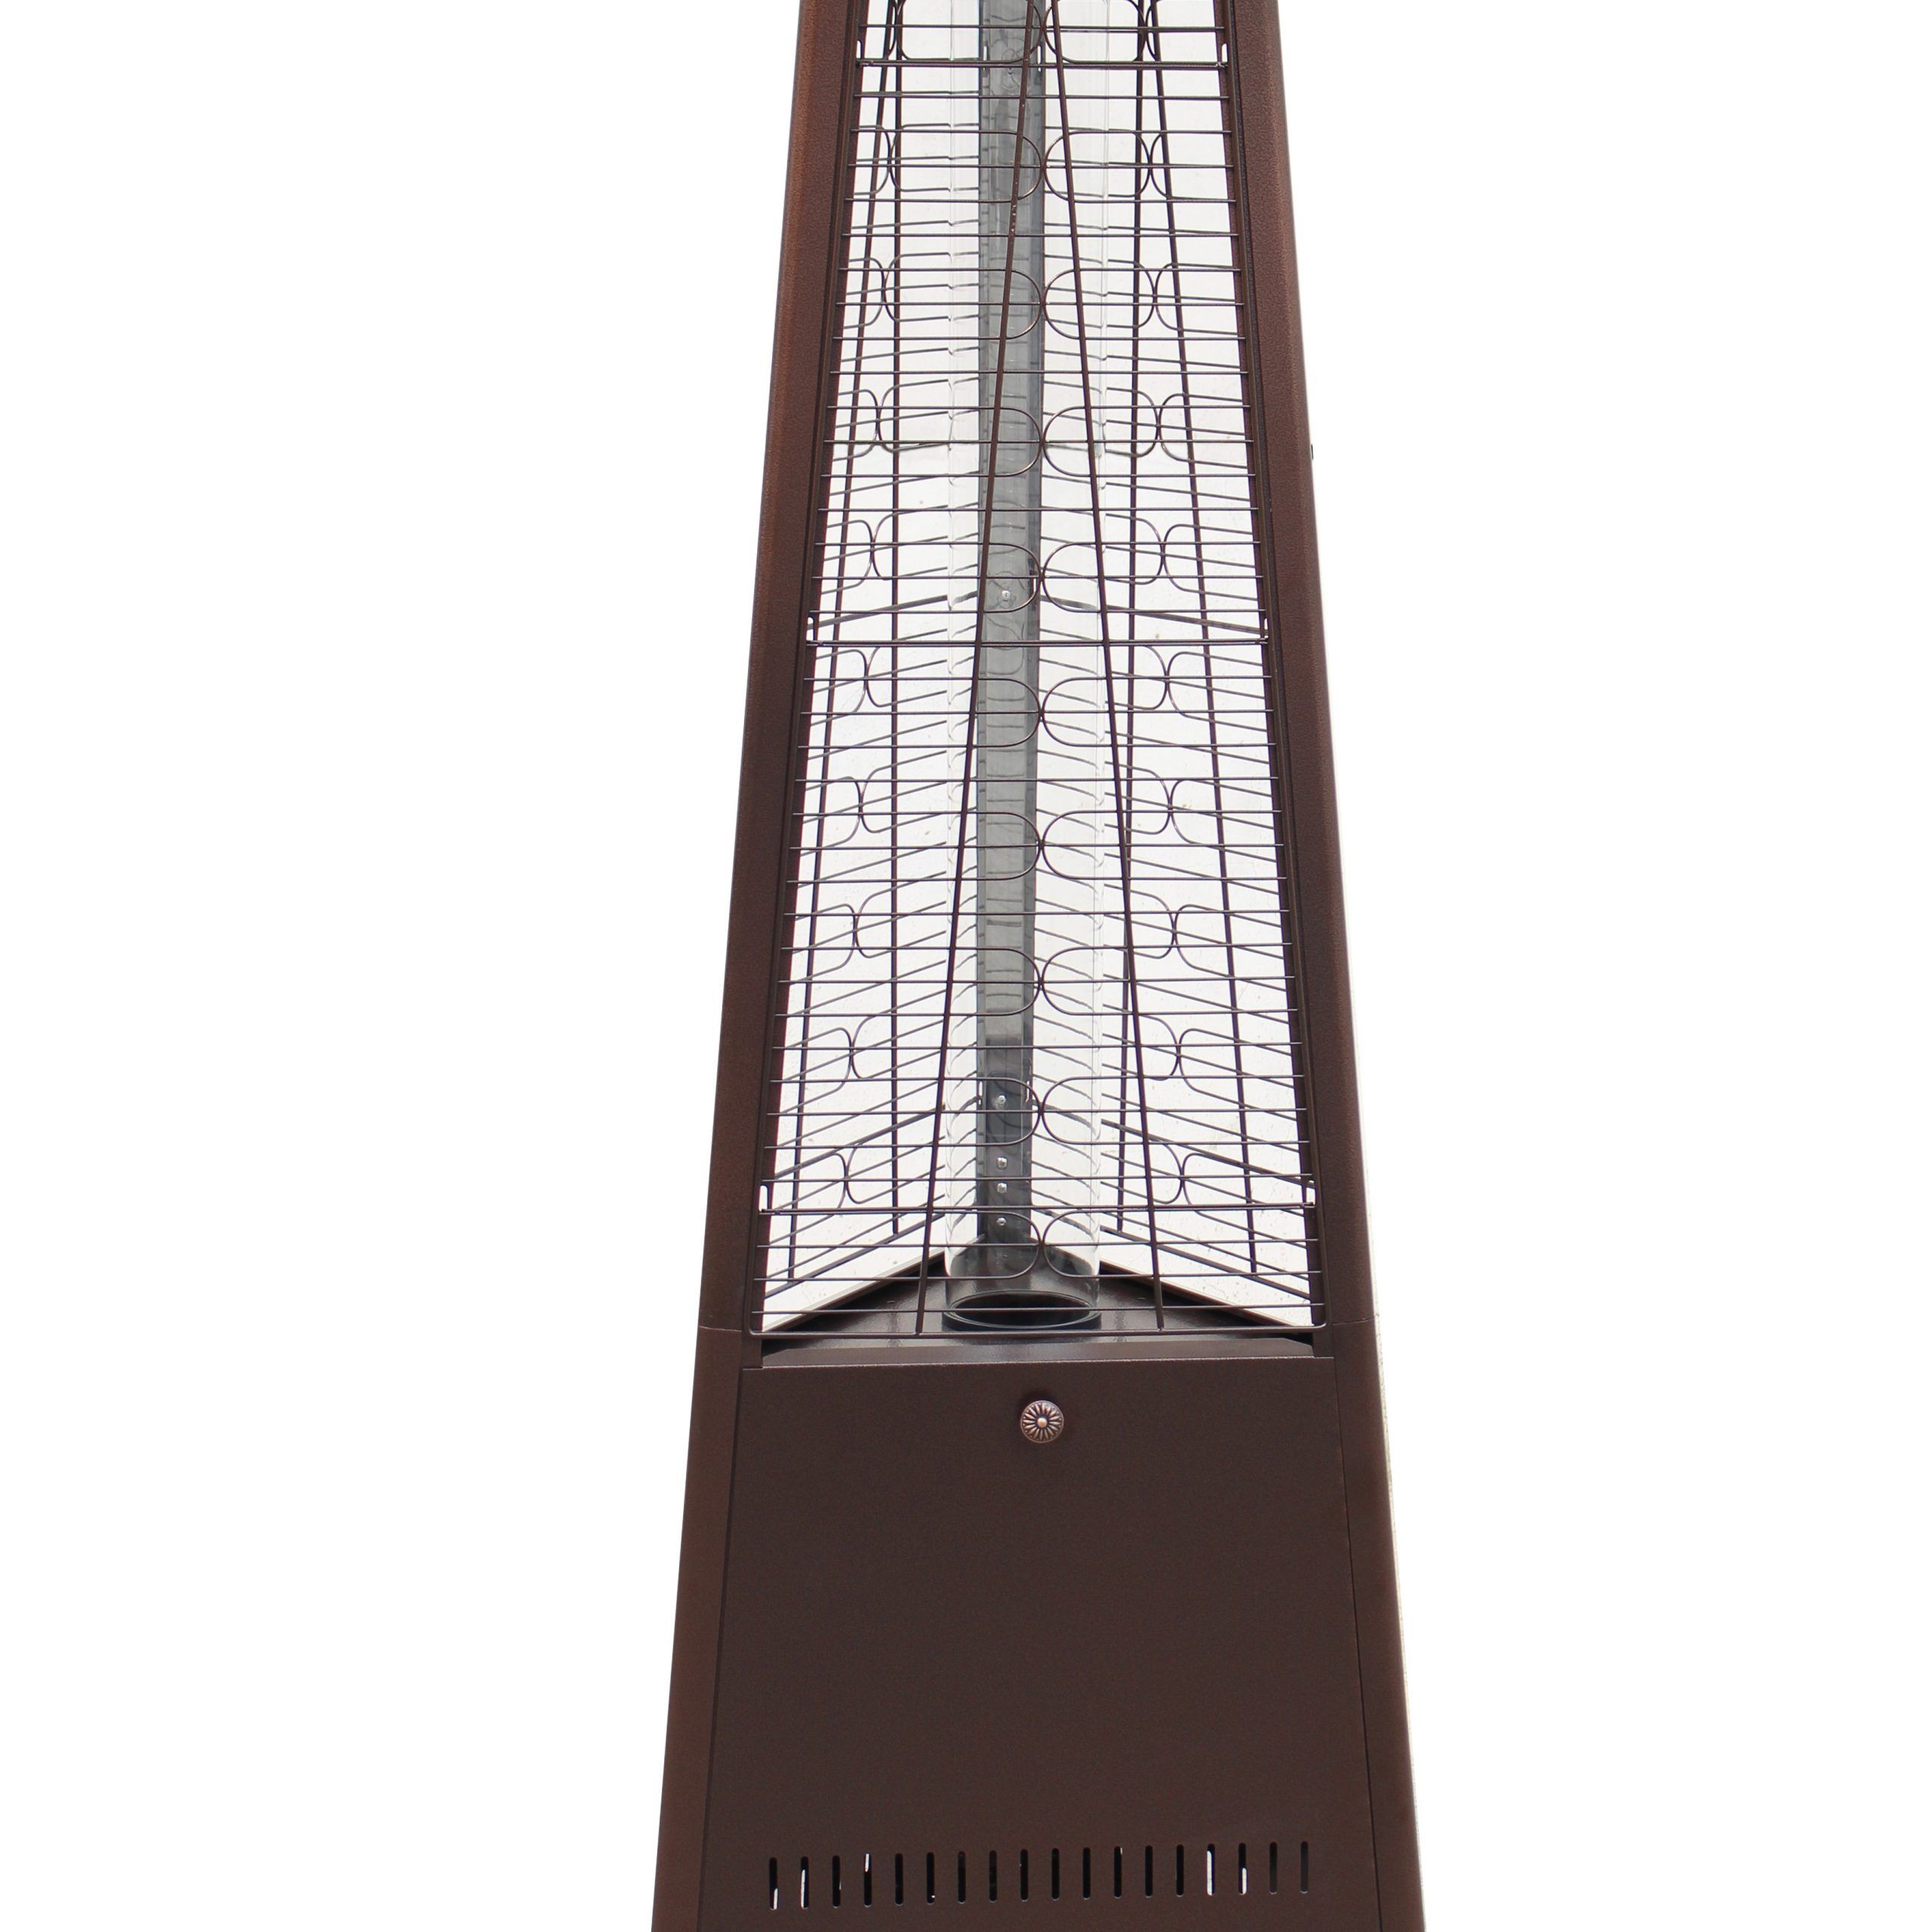 Details About 42,000 Btu Outdoor Patio Heater – Hammered Bronze Intended For 2 Person Hammered Bronze Iron Outdoor Swings (Photo 25 of 25)